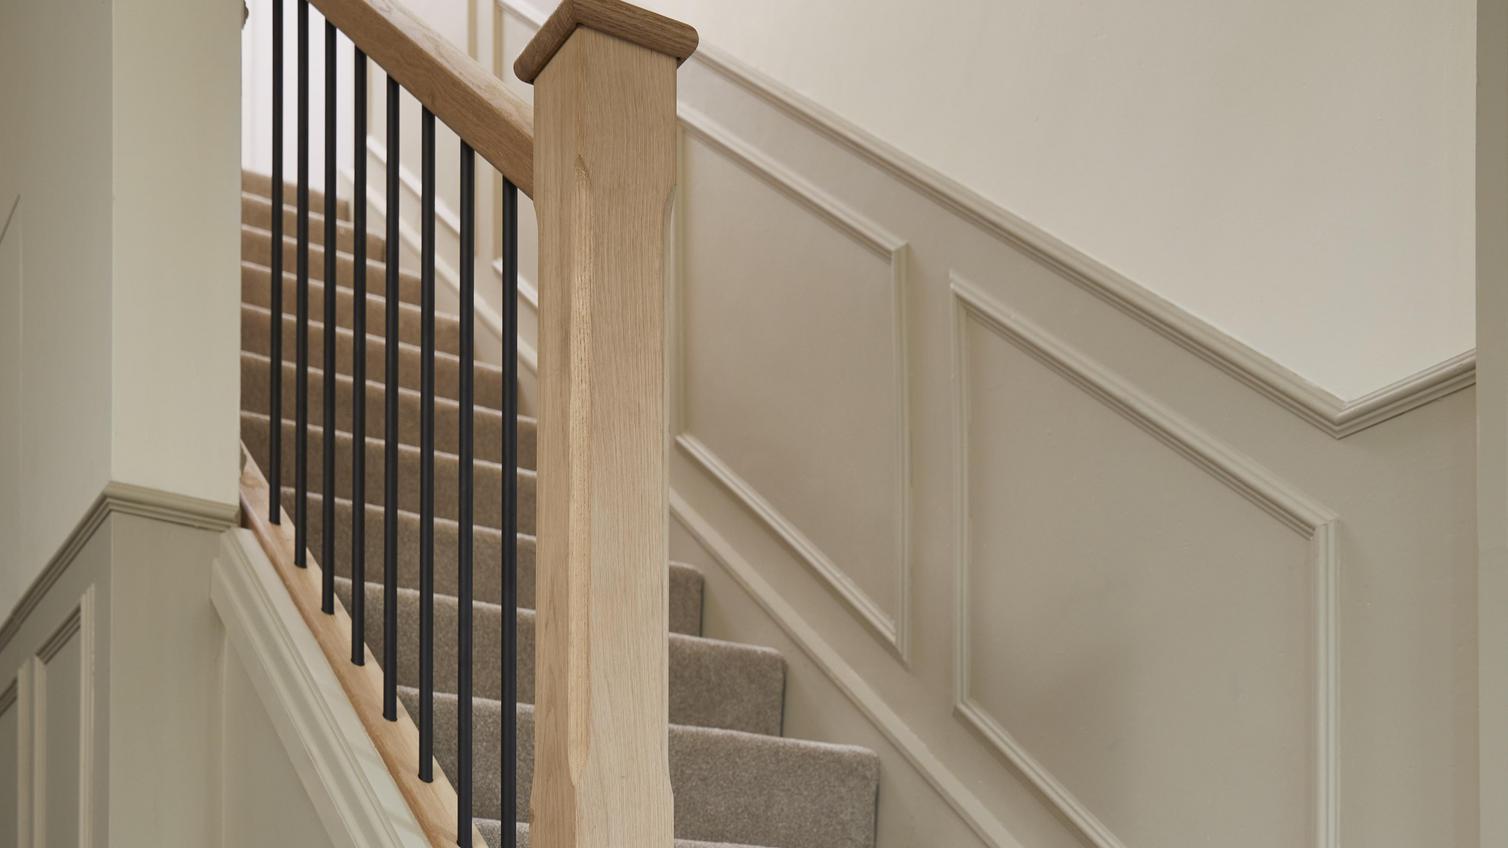 Courtney's staircase, with timber bannister and black, metal spindles